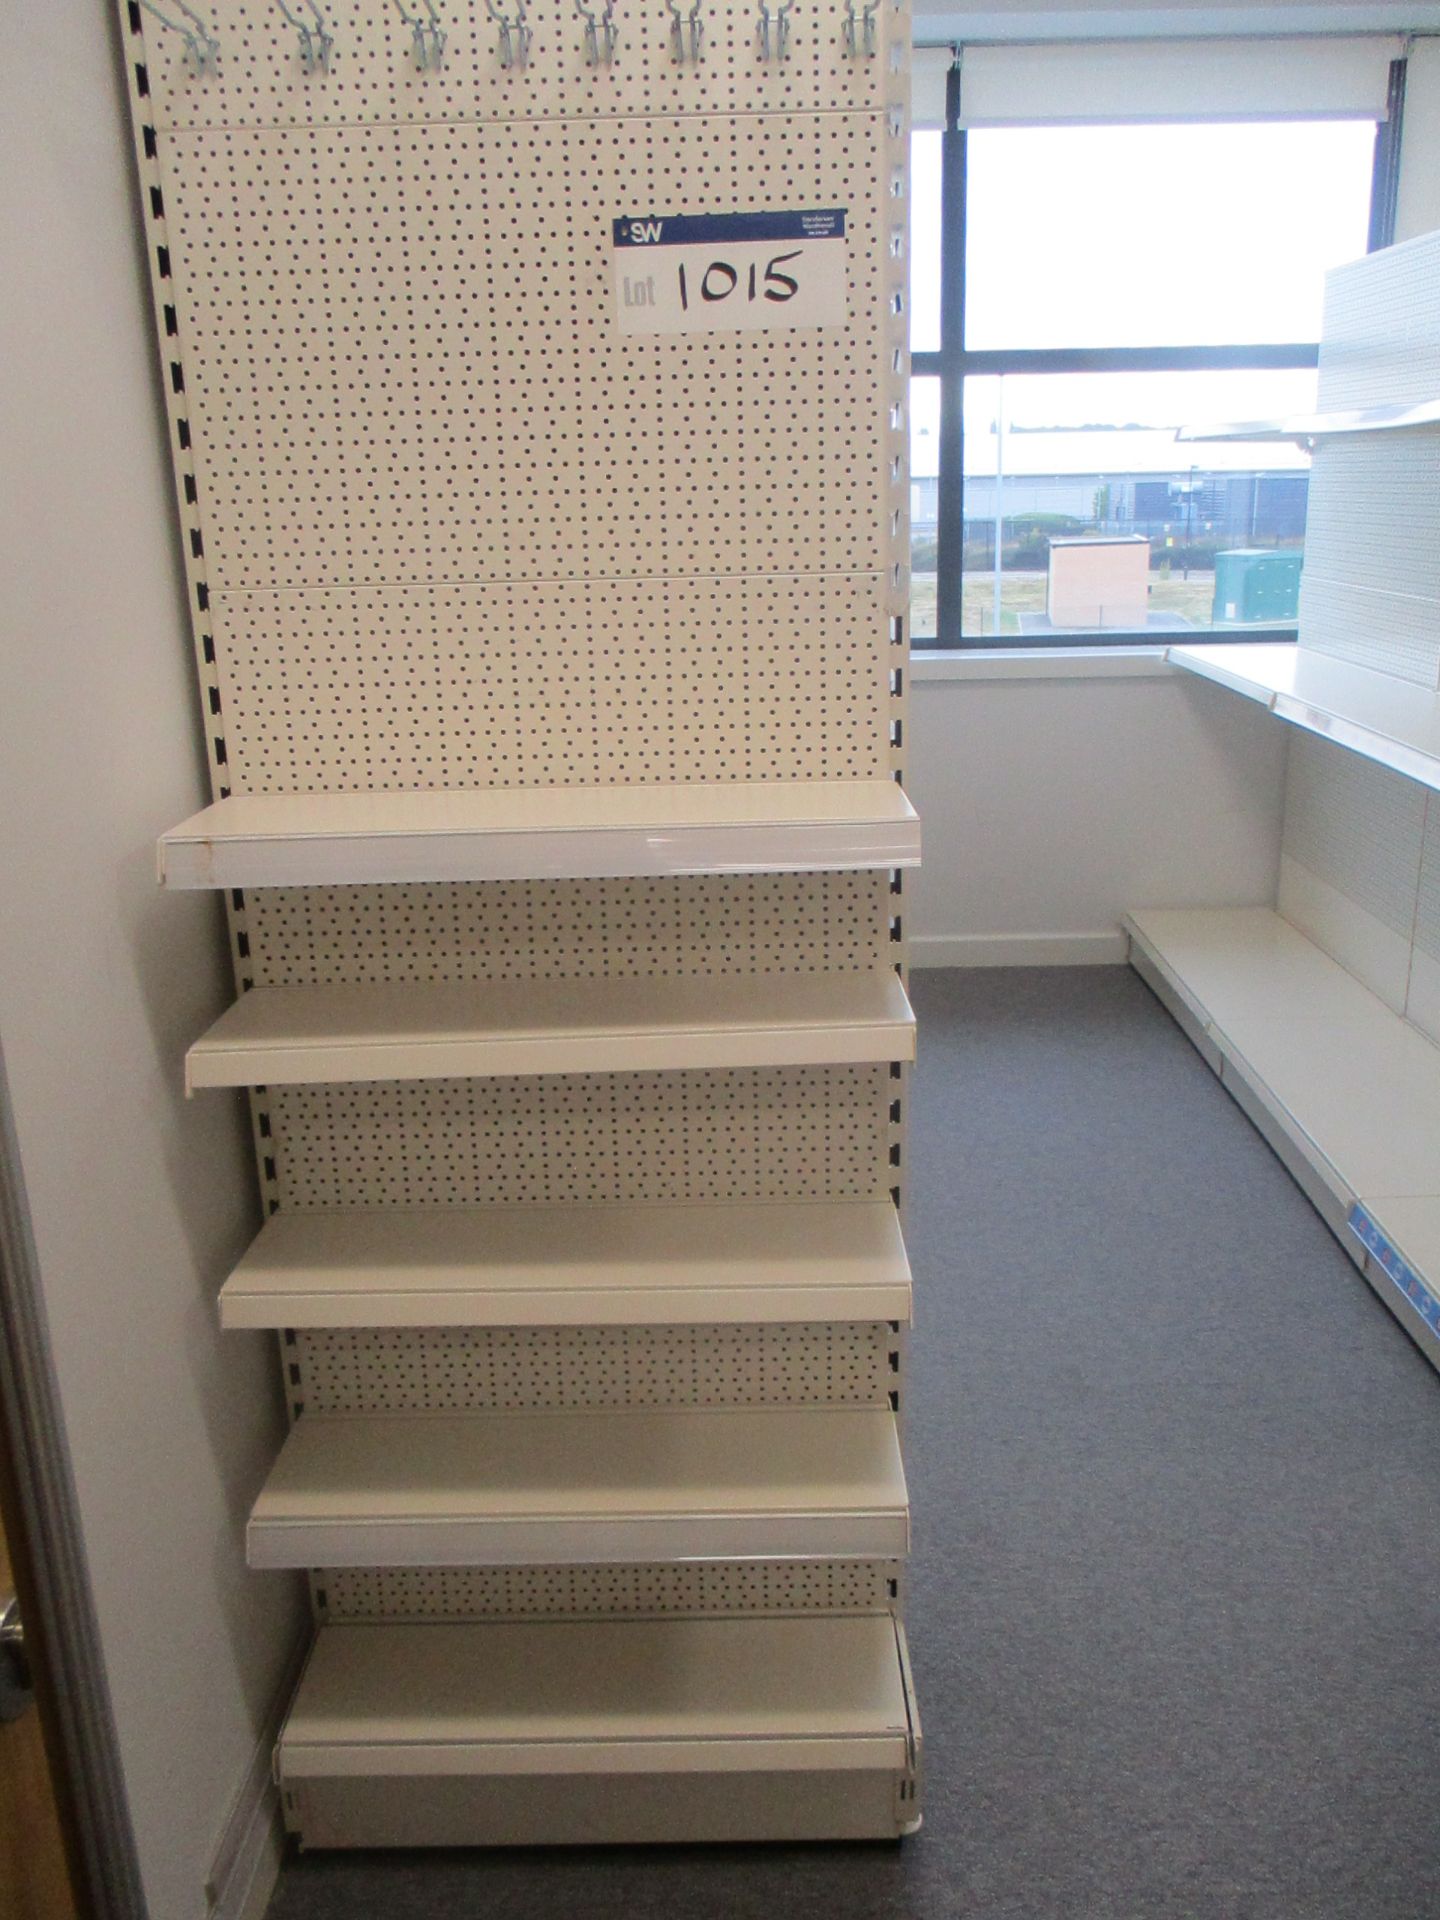 Contents to Room, Quantity of Cantilever Shelving